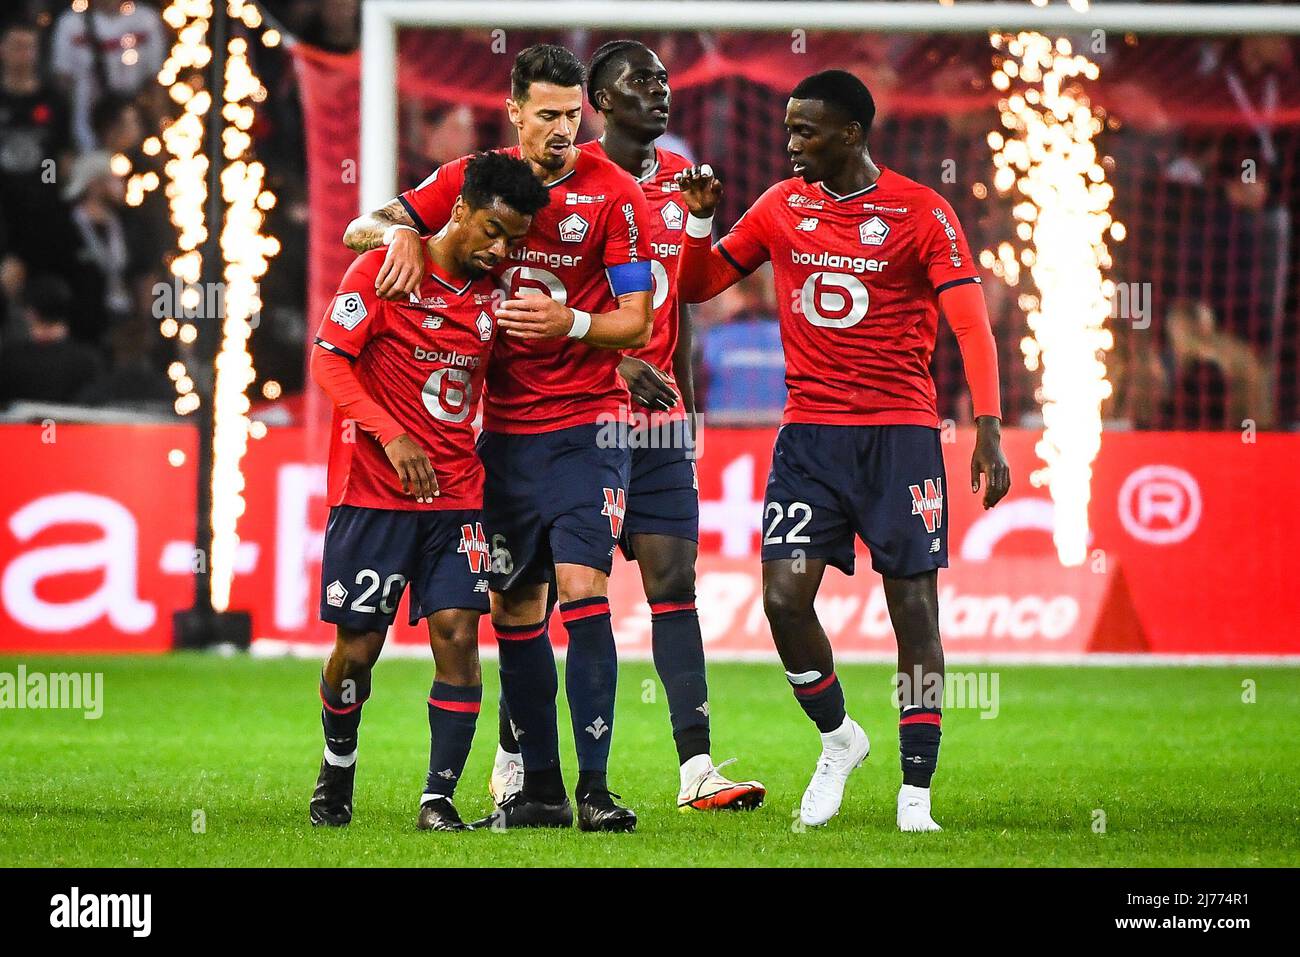 May 6, 2022, Villeneuve-d'Ascq, France, France: Angel GOMES of Lille  celebrate his goal with teammates during the Ligue 1 match between Lille  OSC (LOSC) and AS Monaco at Pierre Mauroy Stadium on